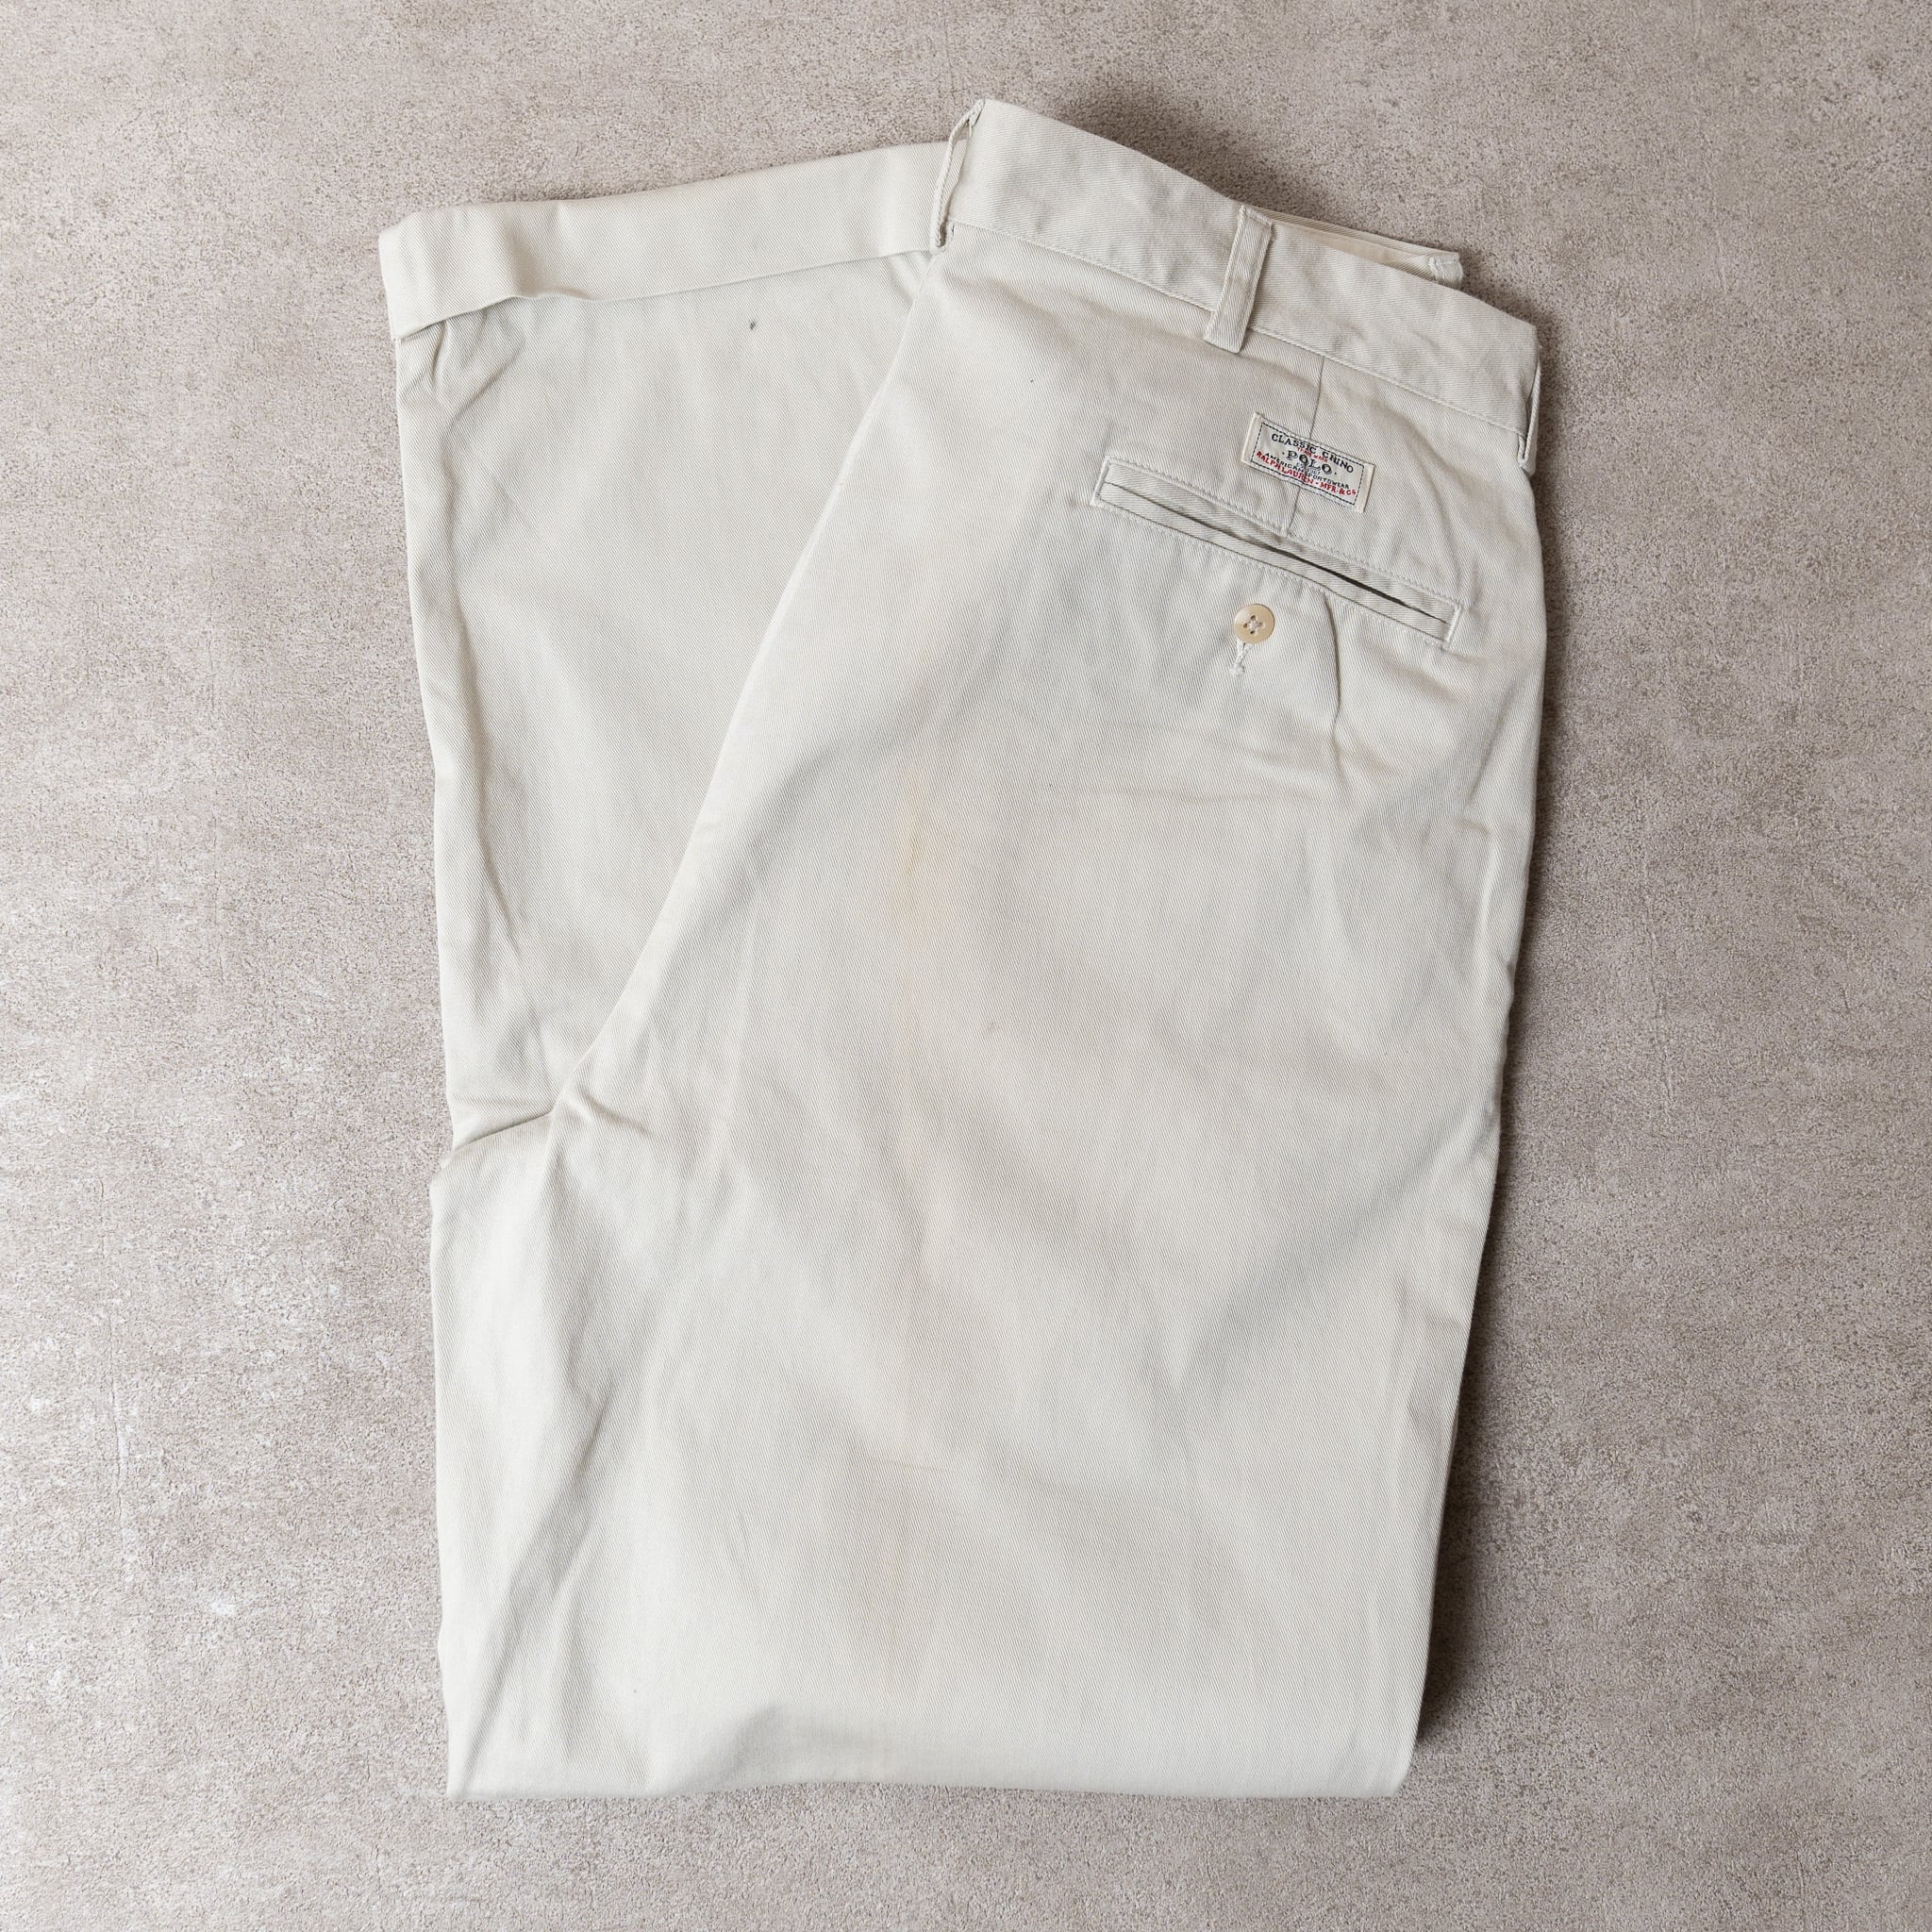 W34】POLO by Ralph Lauren POLO CHINO 